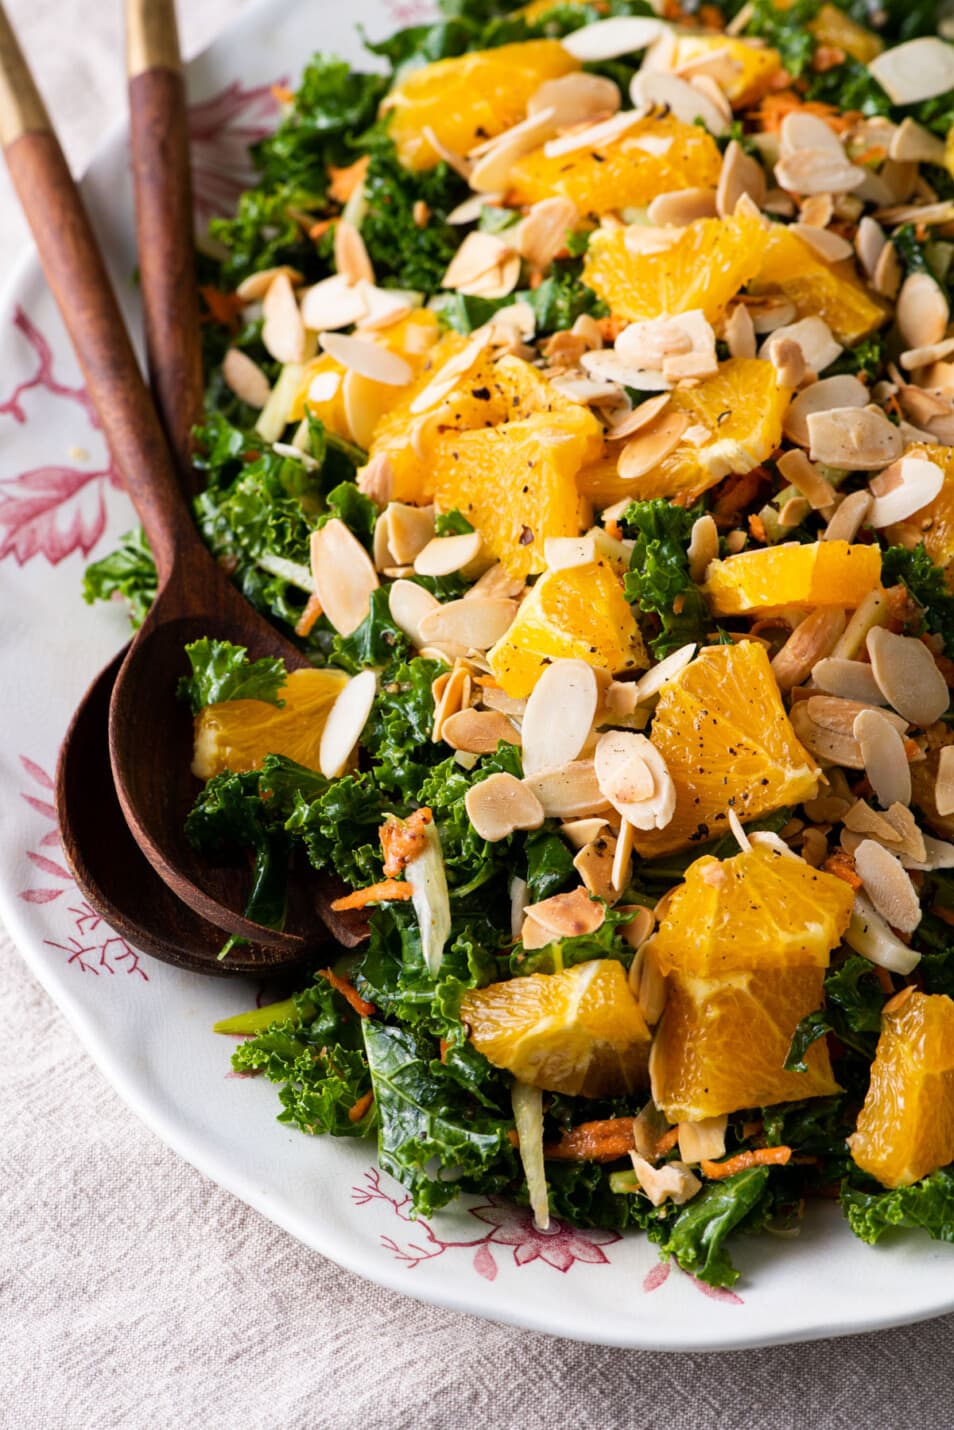 Kale Fennel Salad with Oranges and Almonds - The New Baguette